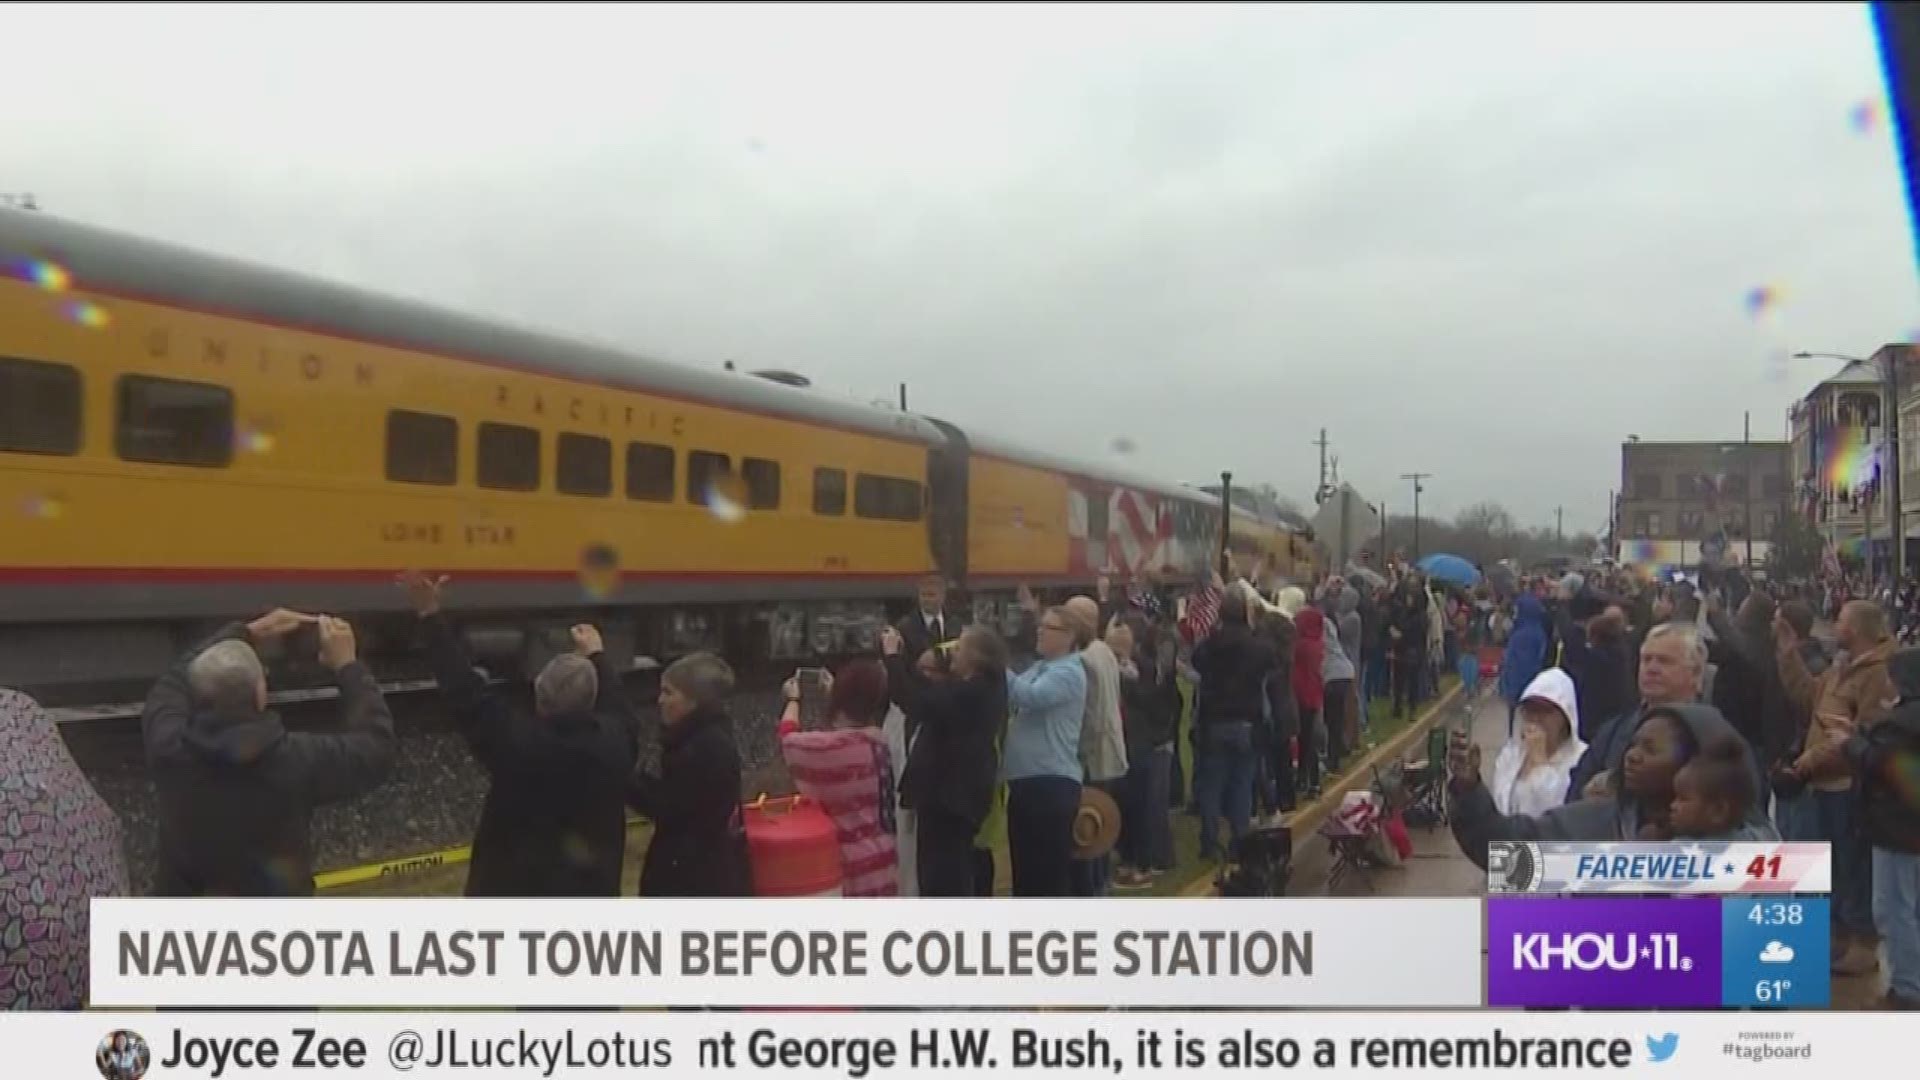 People began lining the tracks, standing on balconies or even rooftops up to four hours early to watch Locomotive 4141 pass through Navasota, the last town before College Station.